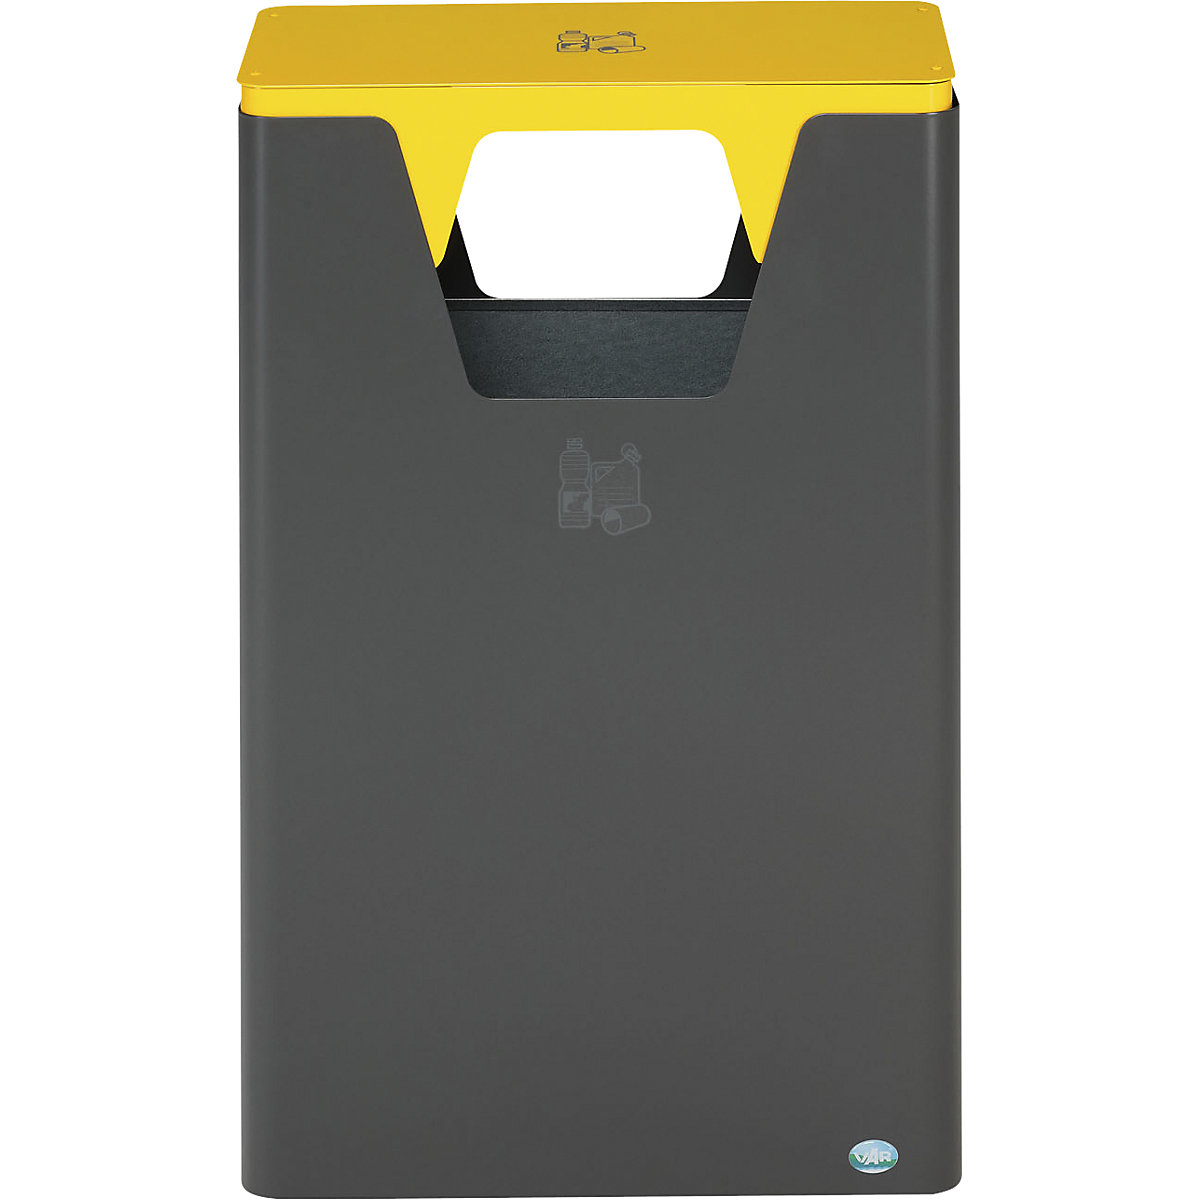 Outdoor recyclable waste collector – VAR, capacity 60 l, HxWxD 890 x 300 x 550 mm, iron glimmer/yellow-2